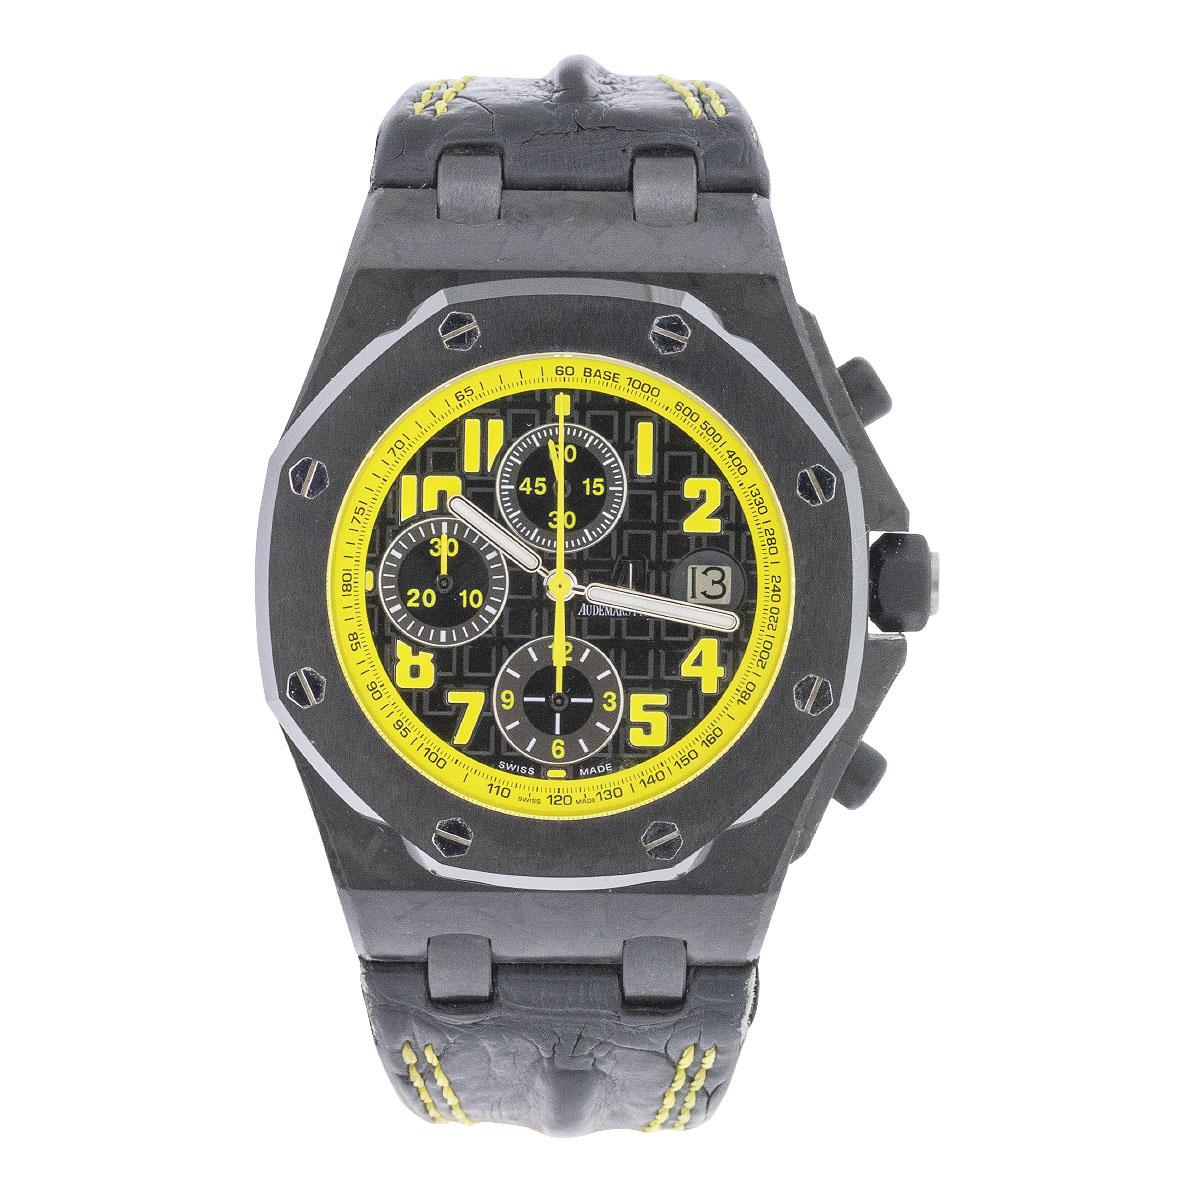 Brand - Audemards Piguet

Model - 26176FO

Dial - Black Tapestry dial with Yellow numerals and highlights

Case - Carbon fiber case

Bracelet - Double fold AP Clasp leather strap

Movement - Automatic

Bezel - Black ceramic bezel

Includes -